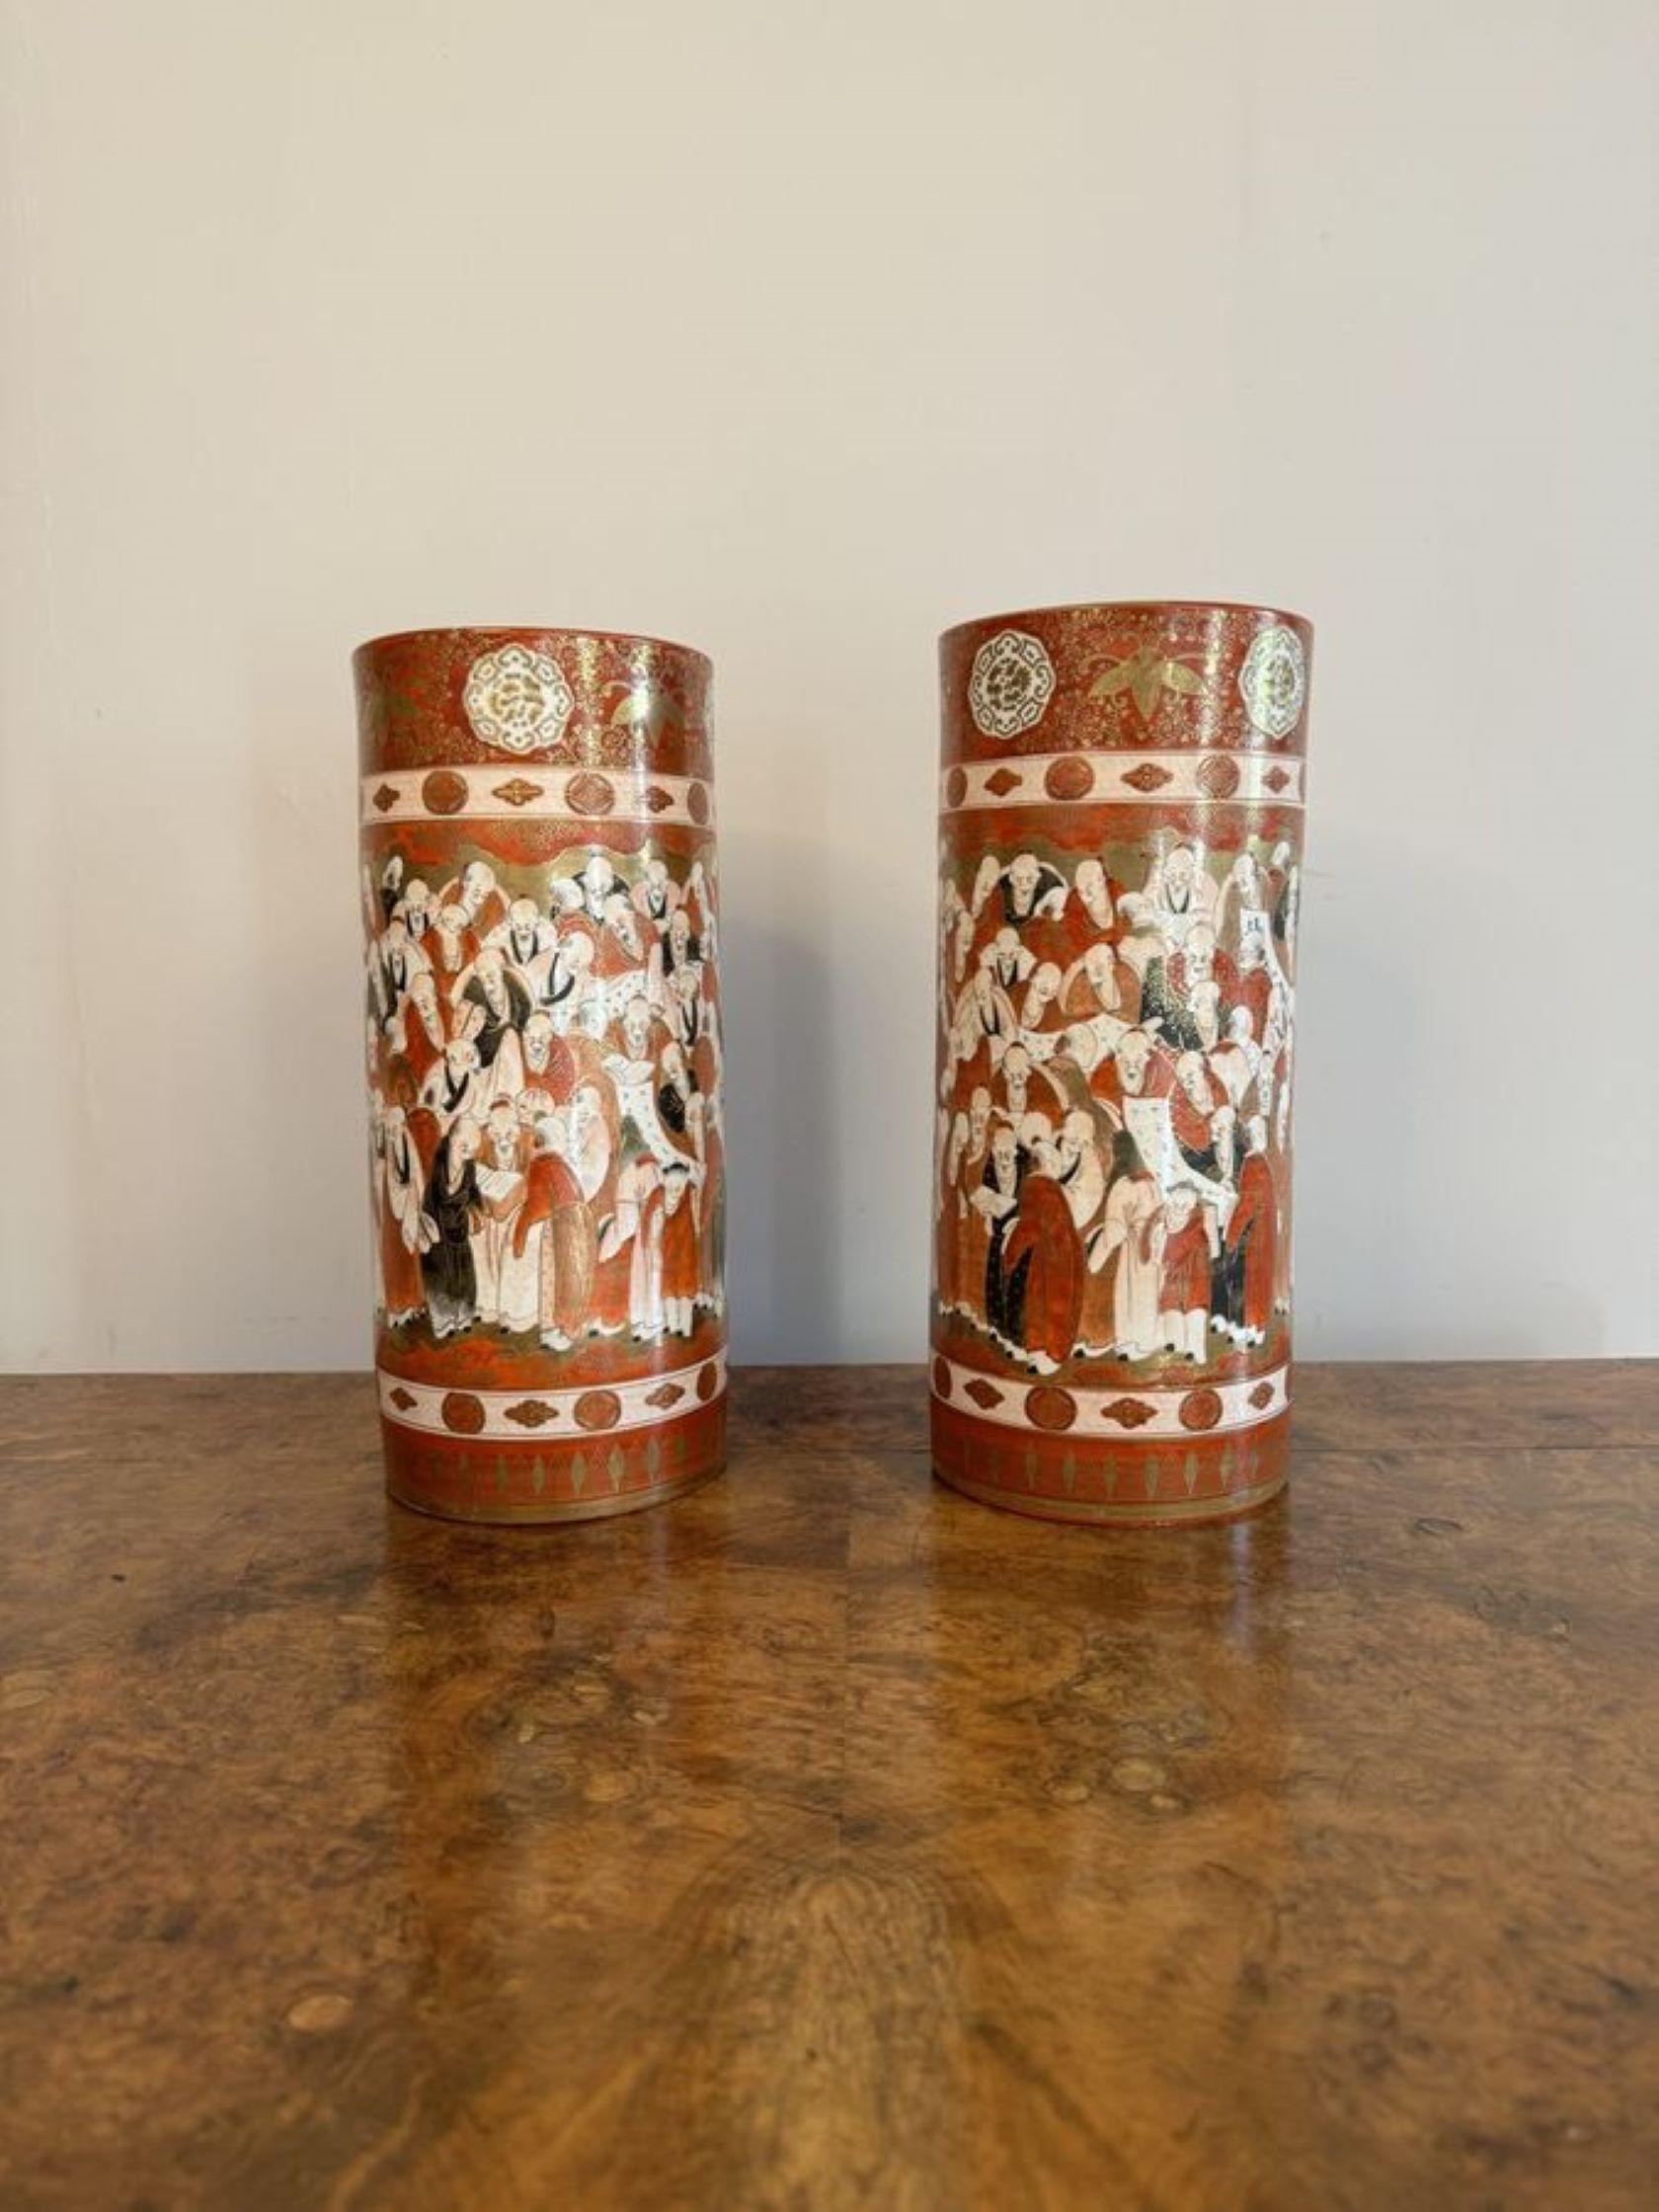 Outstanding quality pair of 19th century Japanese Kutani cylindrical vases, having a quality pair of antique Japanese Kutani porcelain cylindrical vases with quality hand painted Japanese figural scenes in period clothing in stunning red, orange,